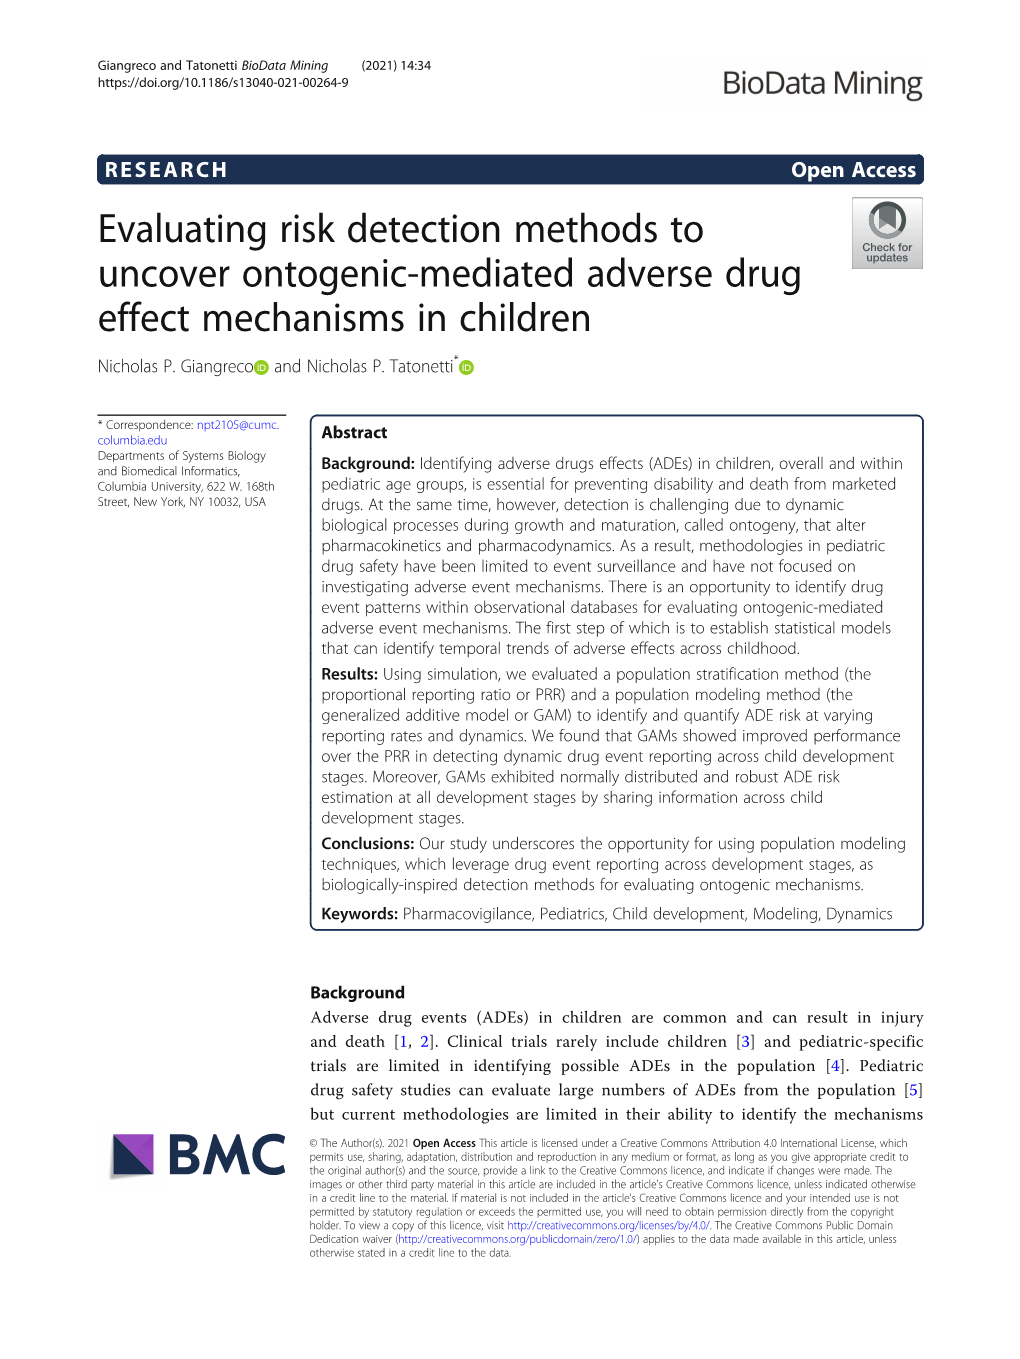 Evaluating Risk Detection Methods to Uncover Ontogenic-Mediated Adverse Drug Effect Mechanisms in Children Nicholas P